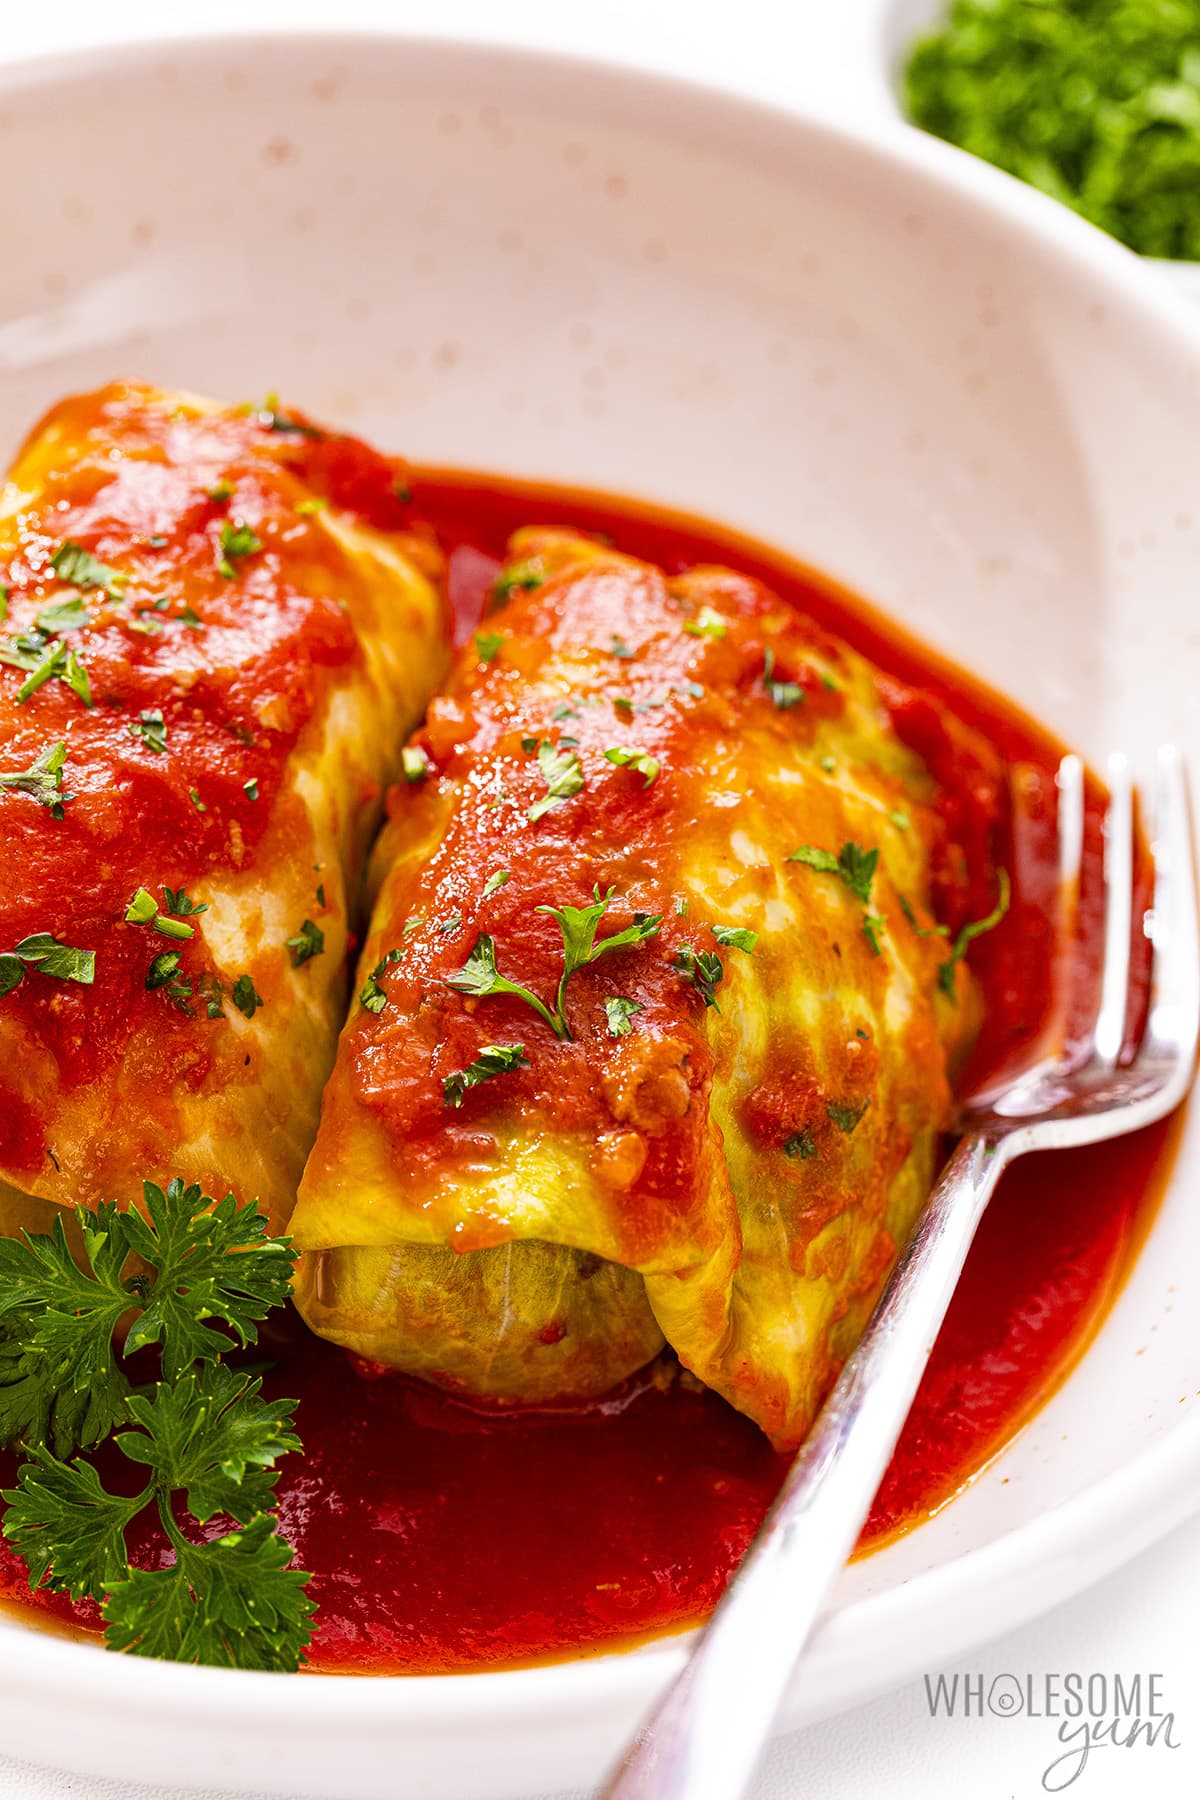 Two stuffed cabbage rolls close up in a bowl with a fork and parsley garnish.